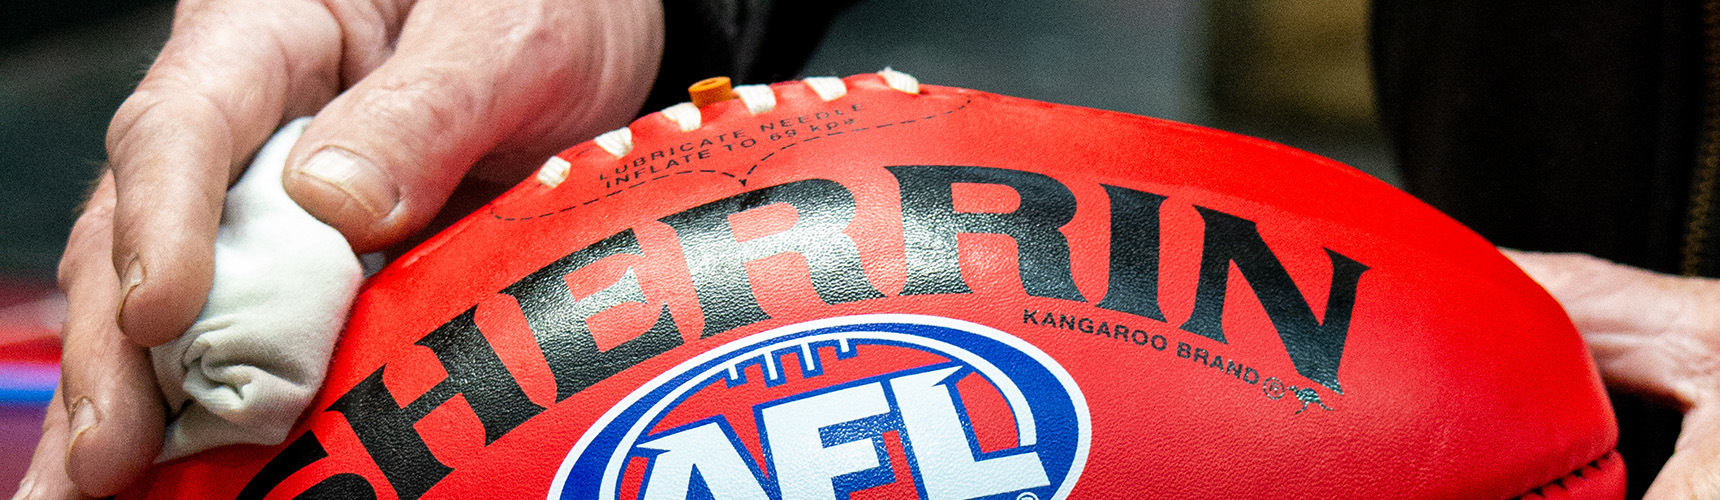 Maintenance & Care guide for your Sherrin football